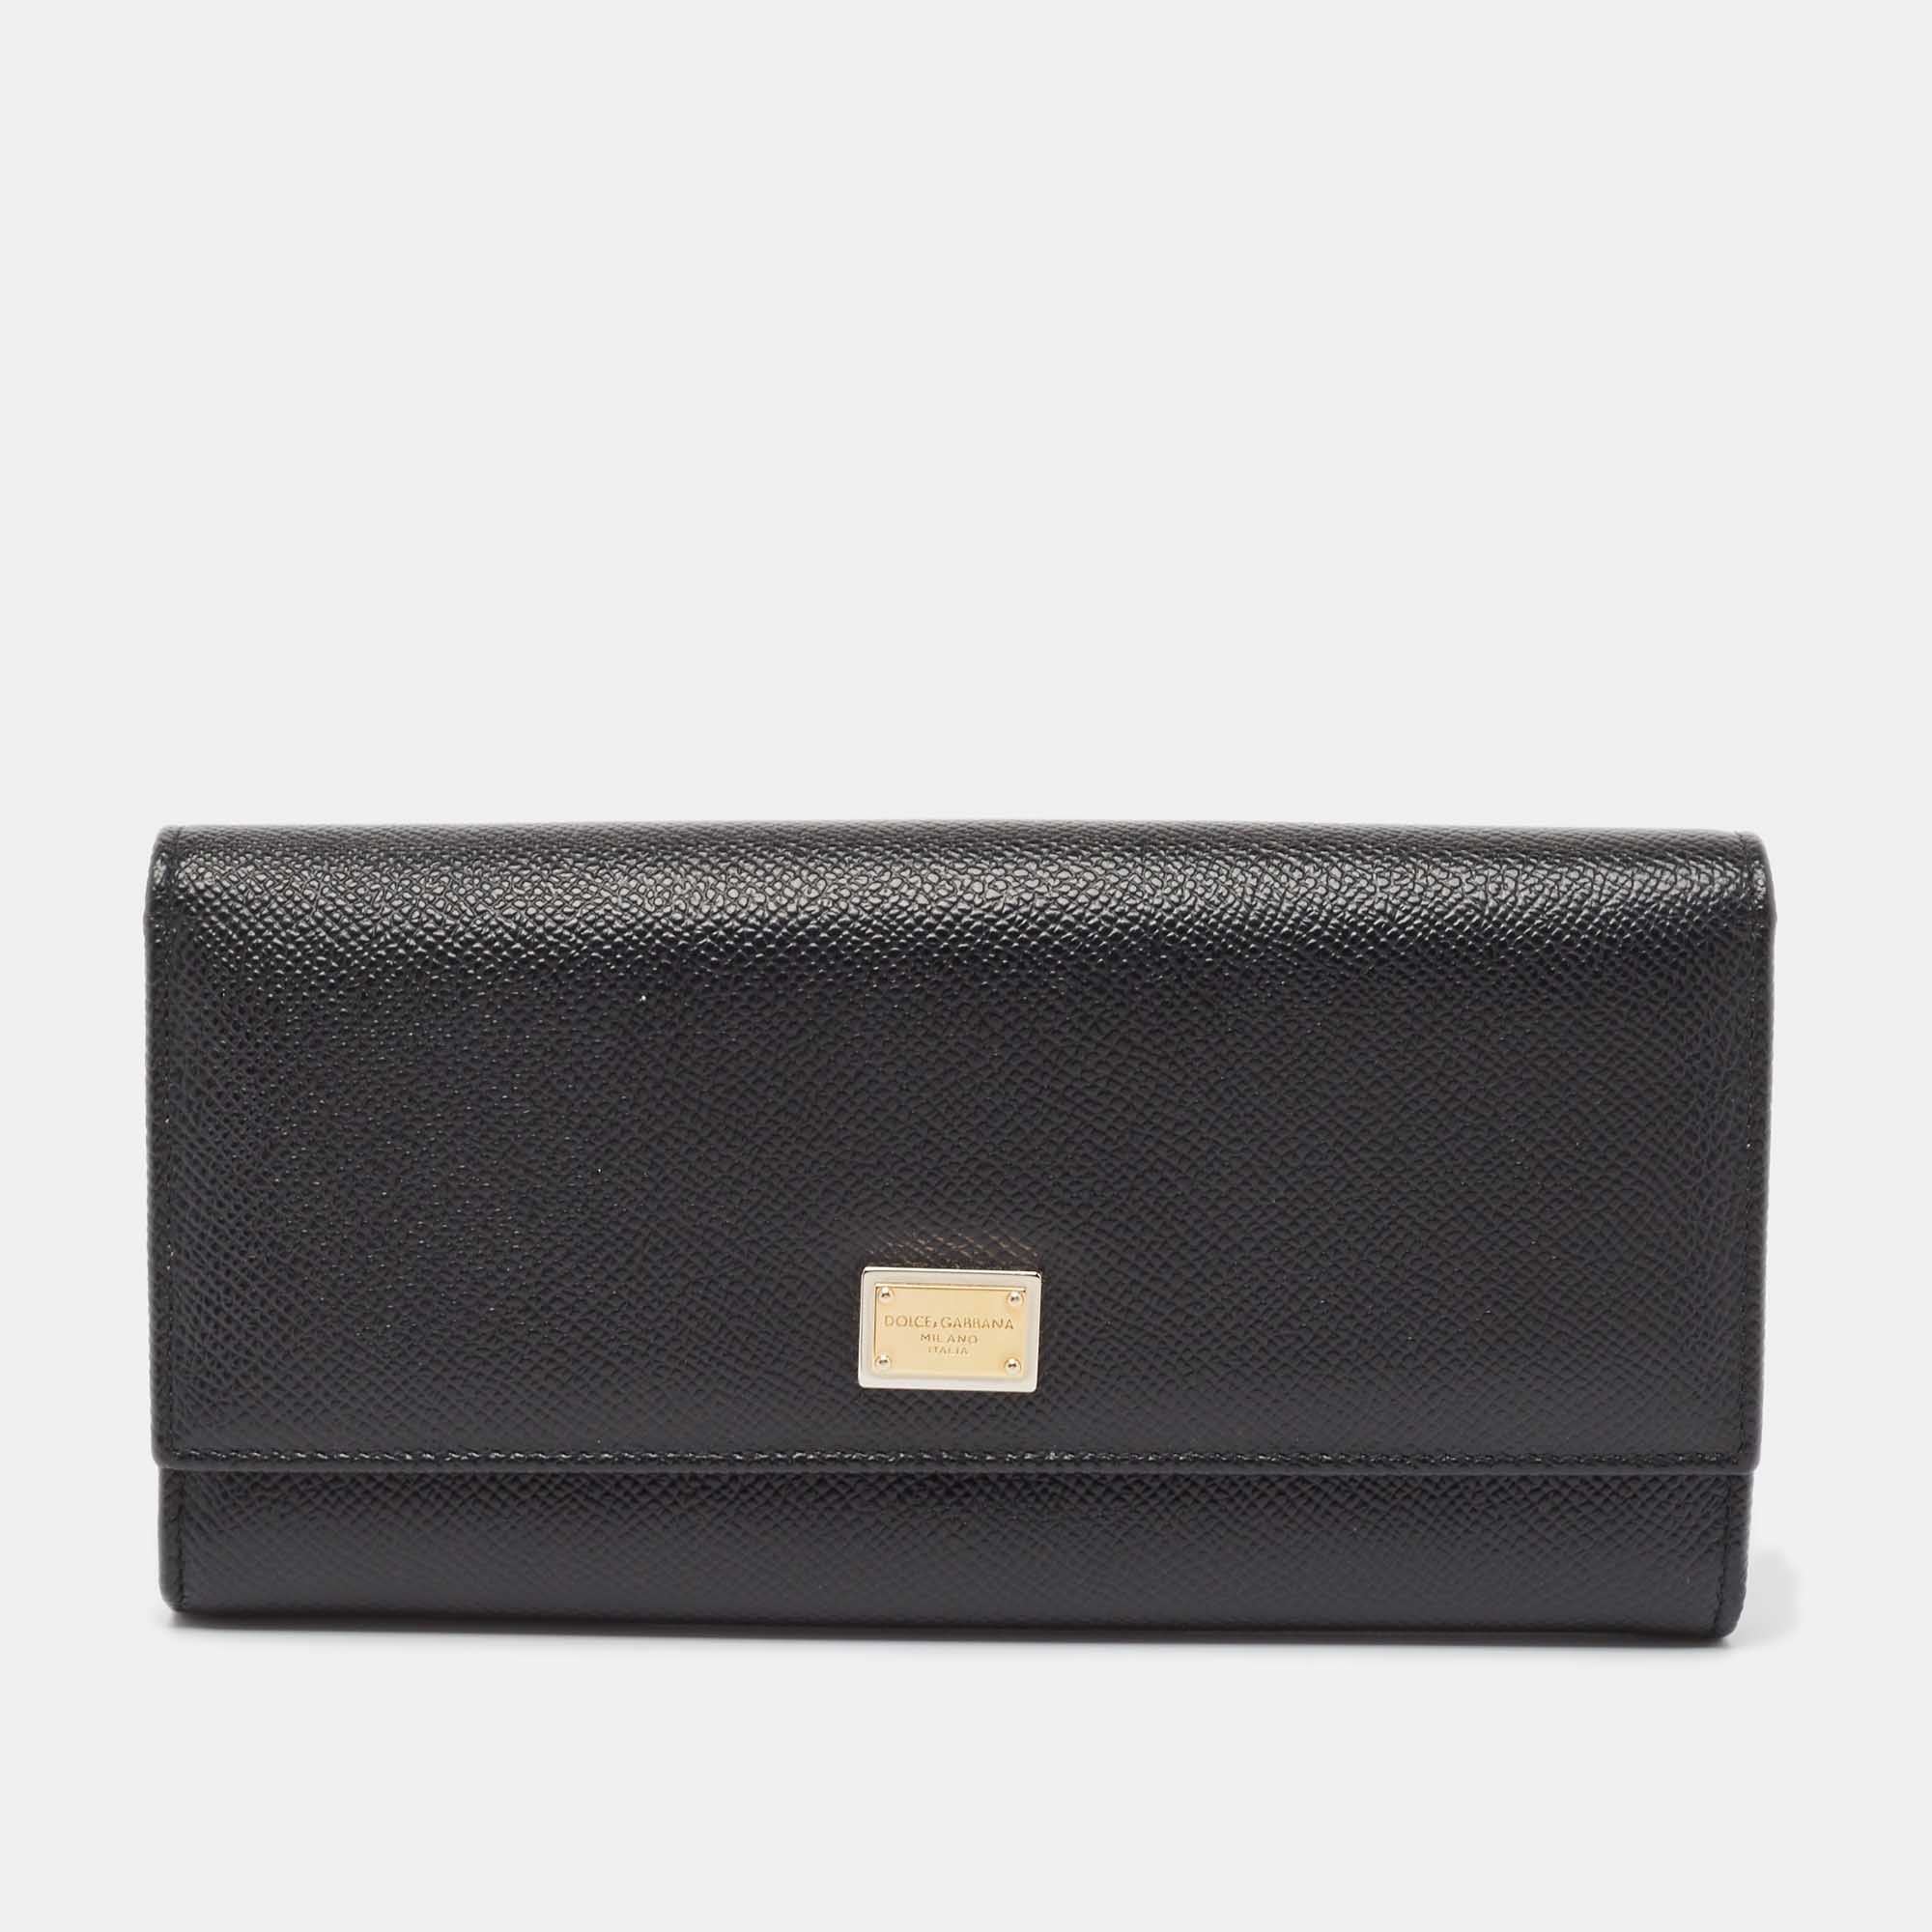 

Dolce & Gabbana Black Leather Flap Continental Wallet